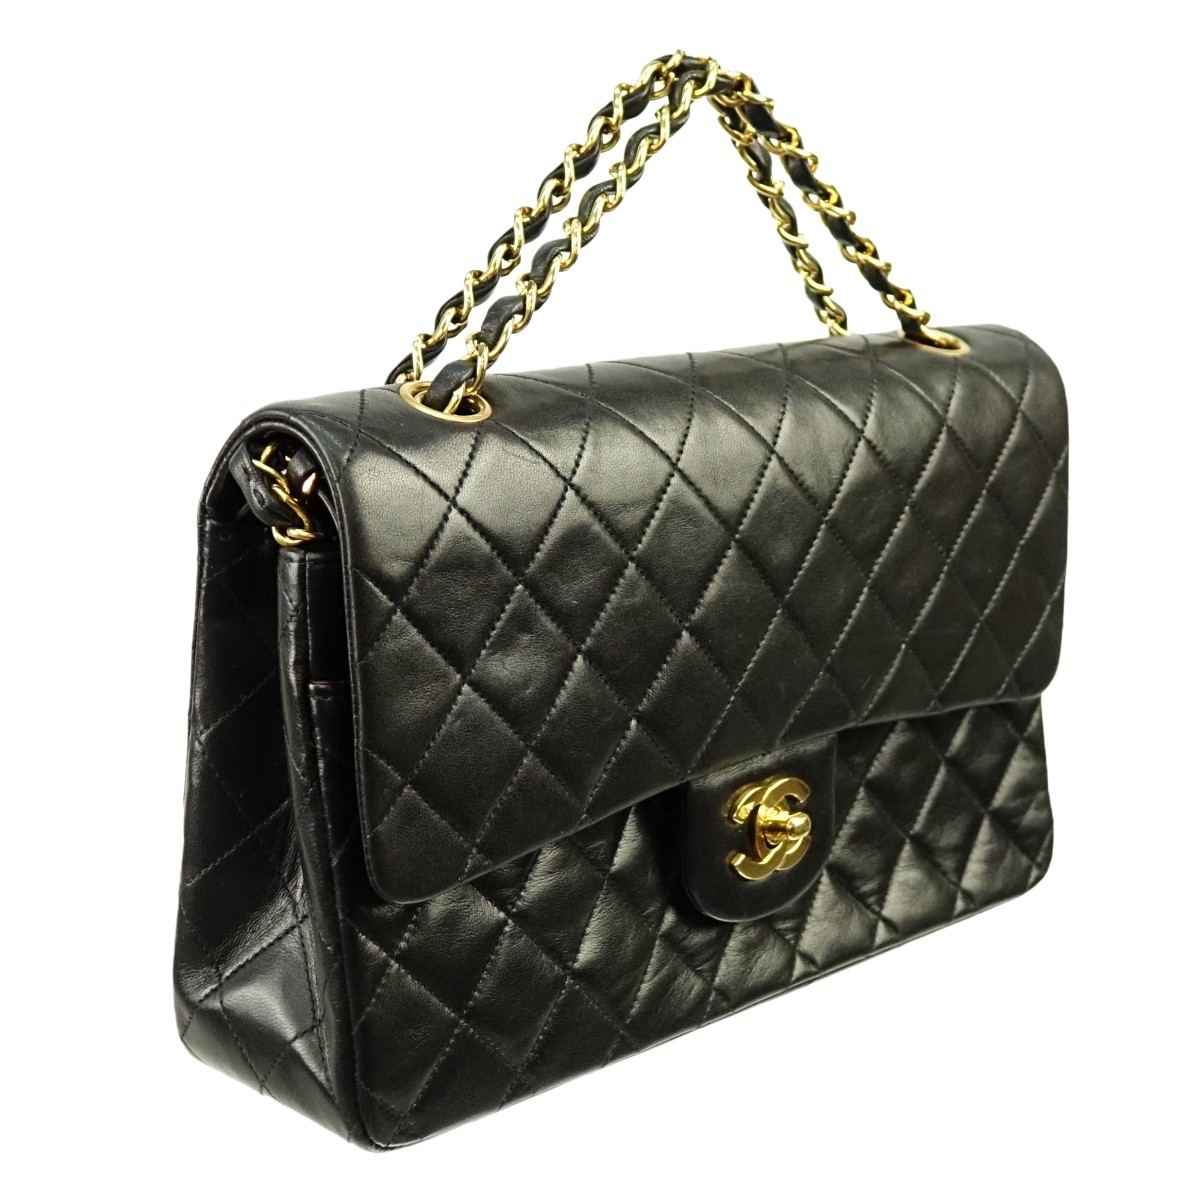 Chanel Black Quilted Leather Double Flap Bag 26